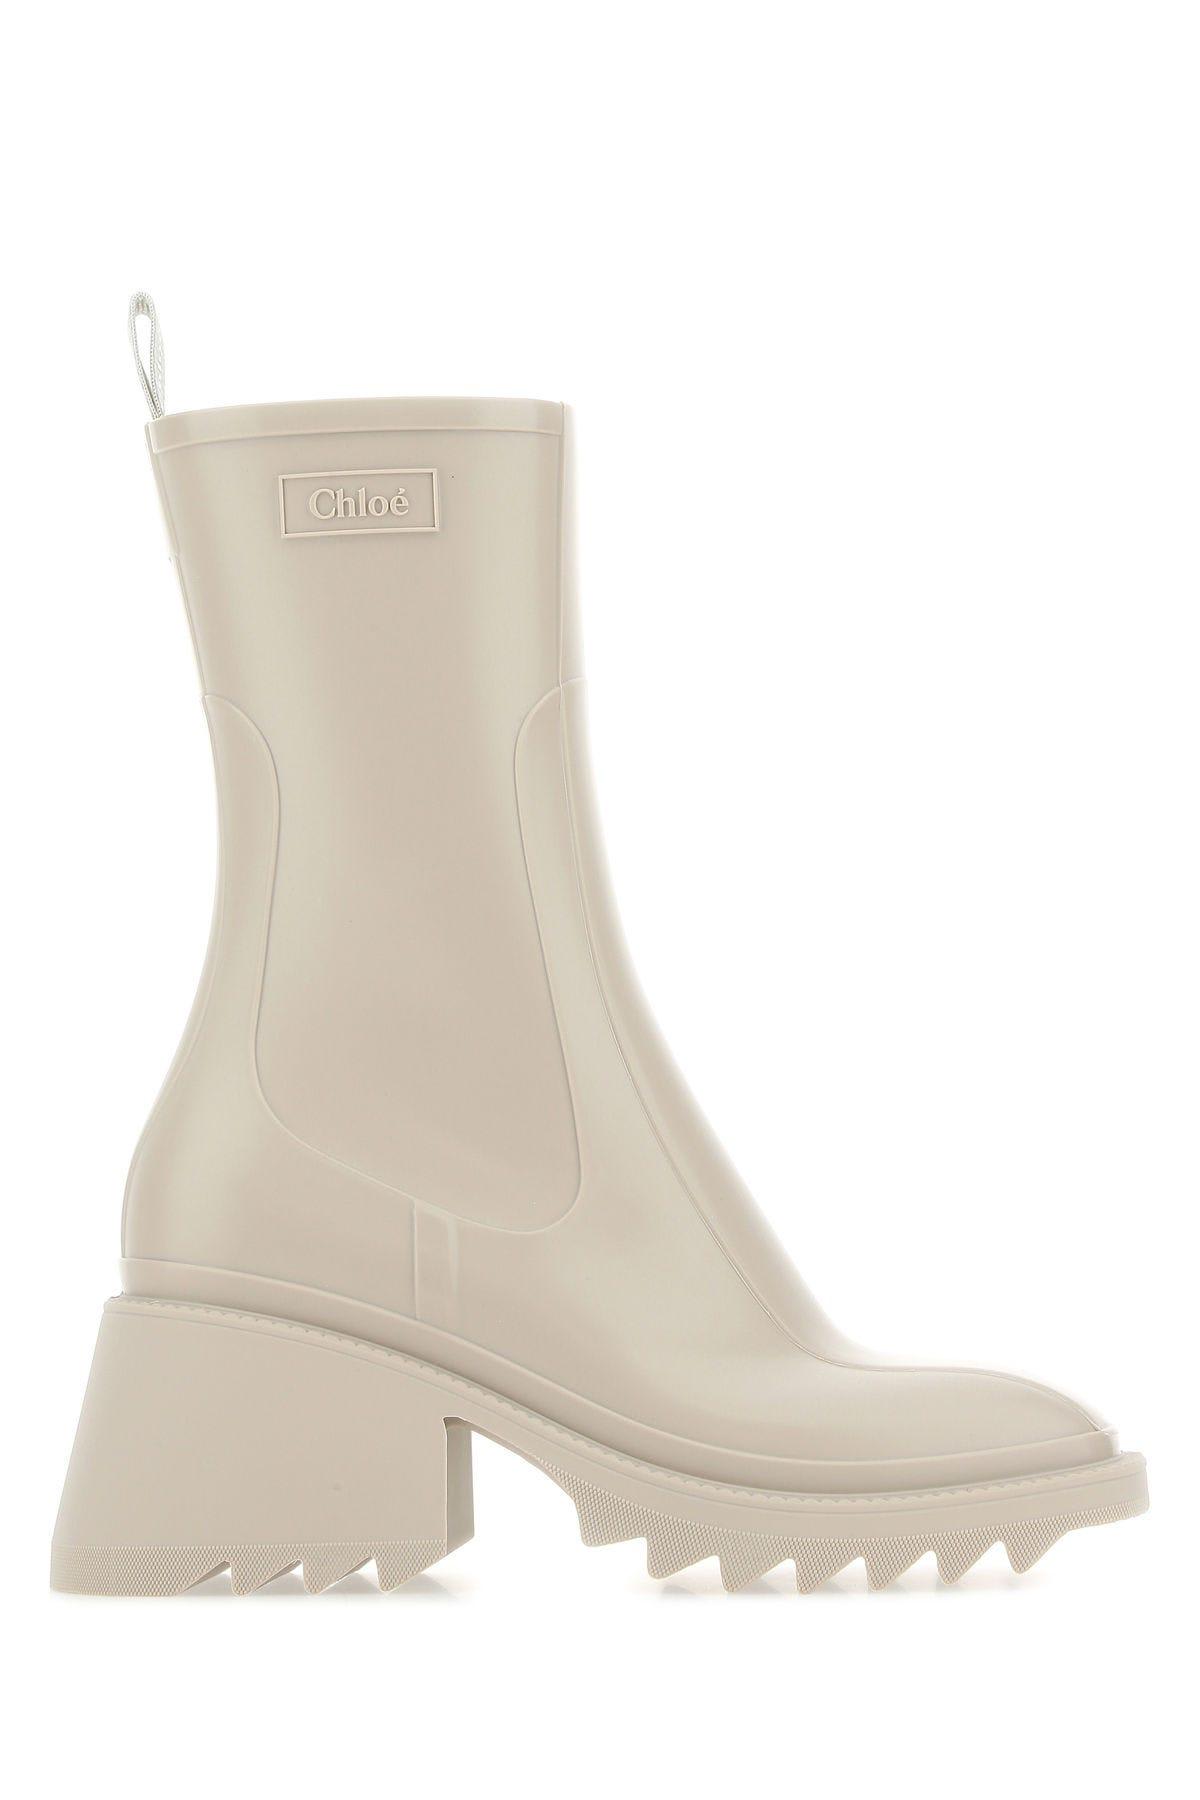 CHLOÉ DOVE GREY RUBBER ANKLE BOOTS